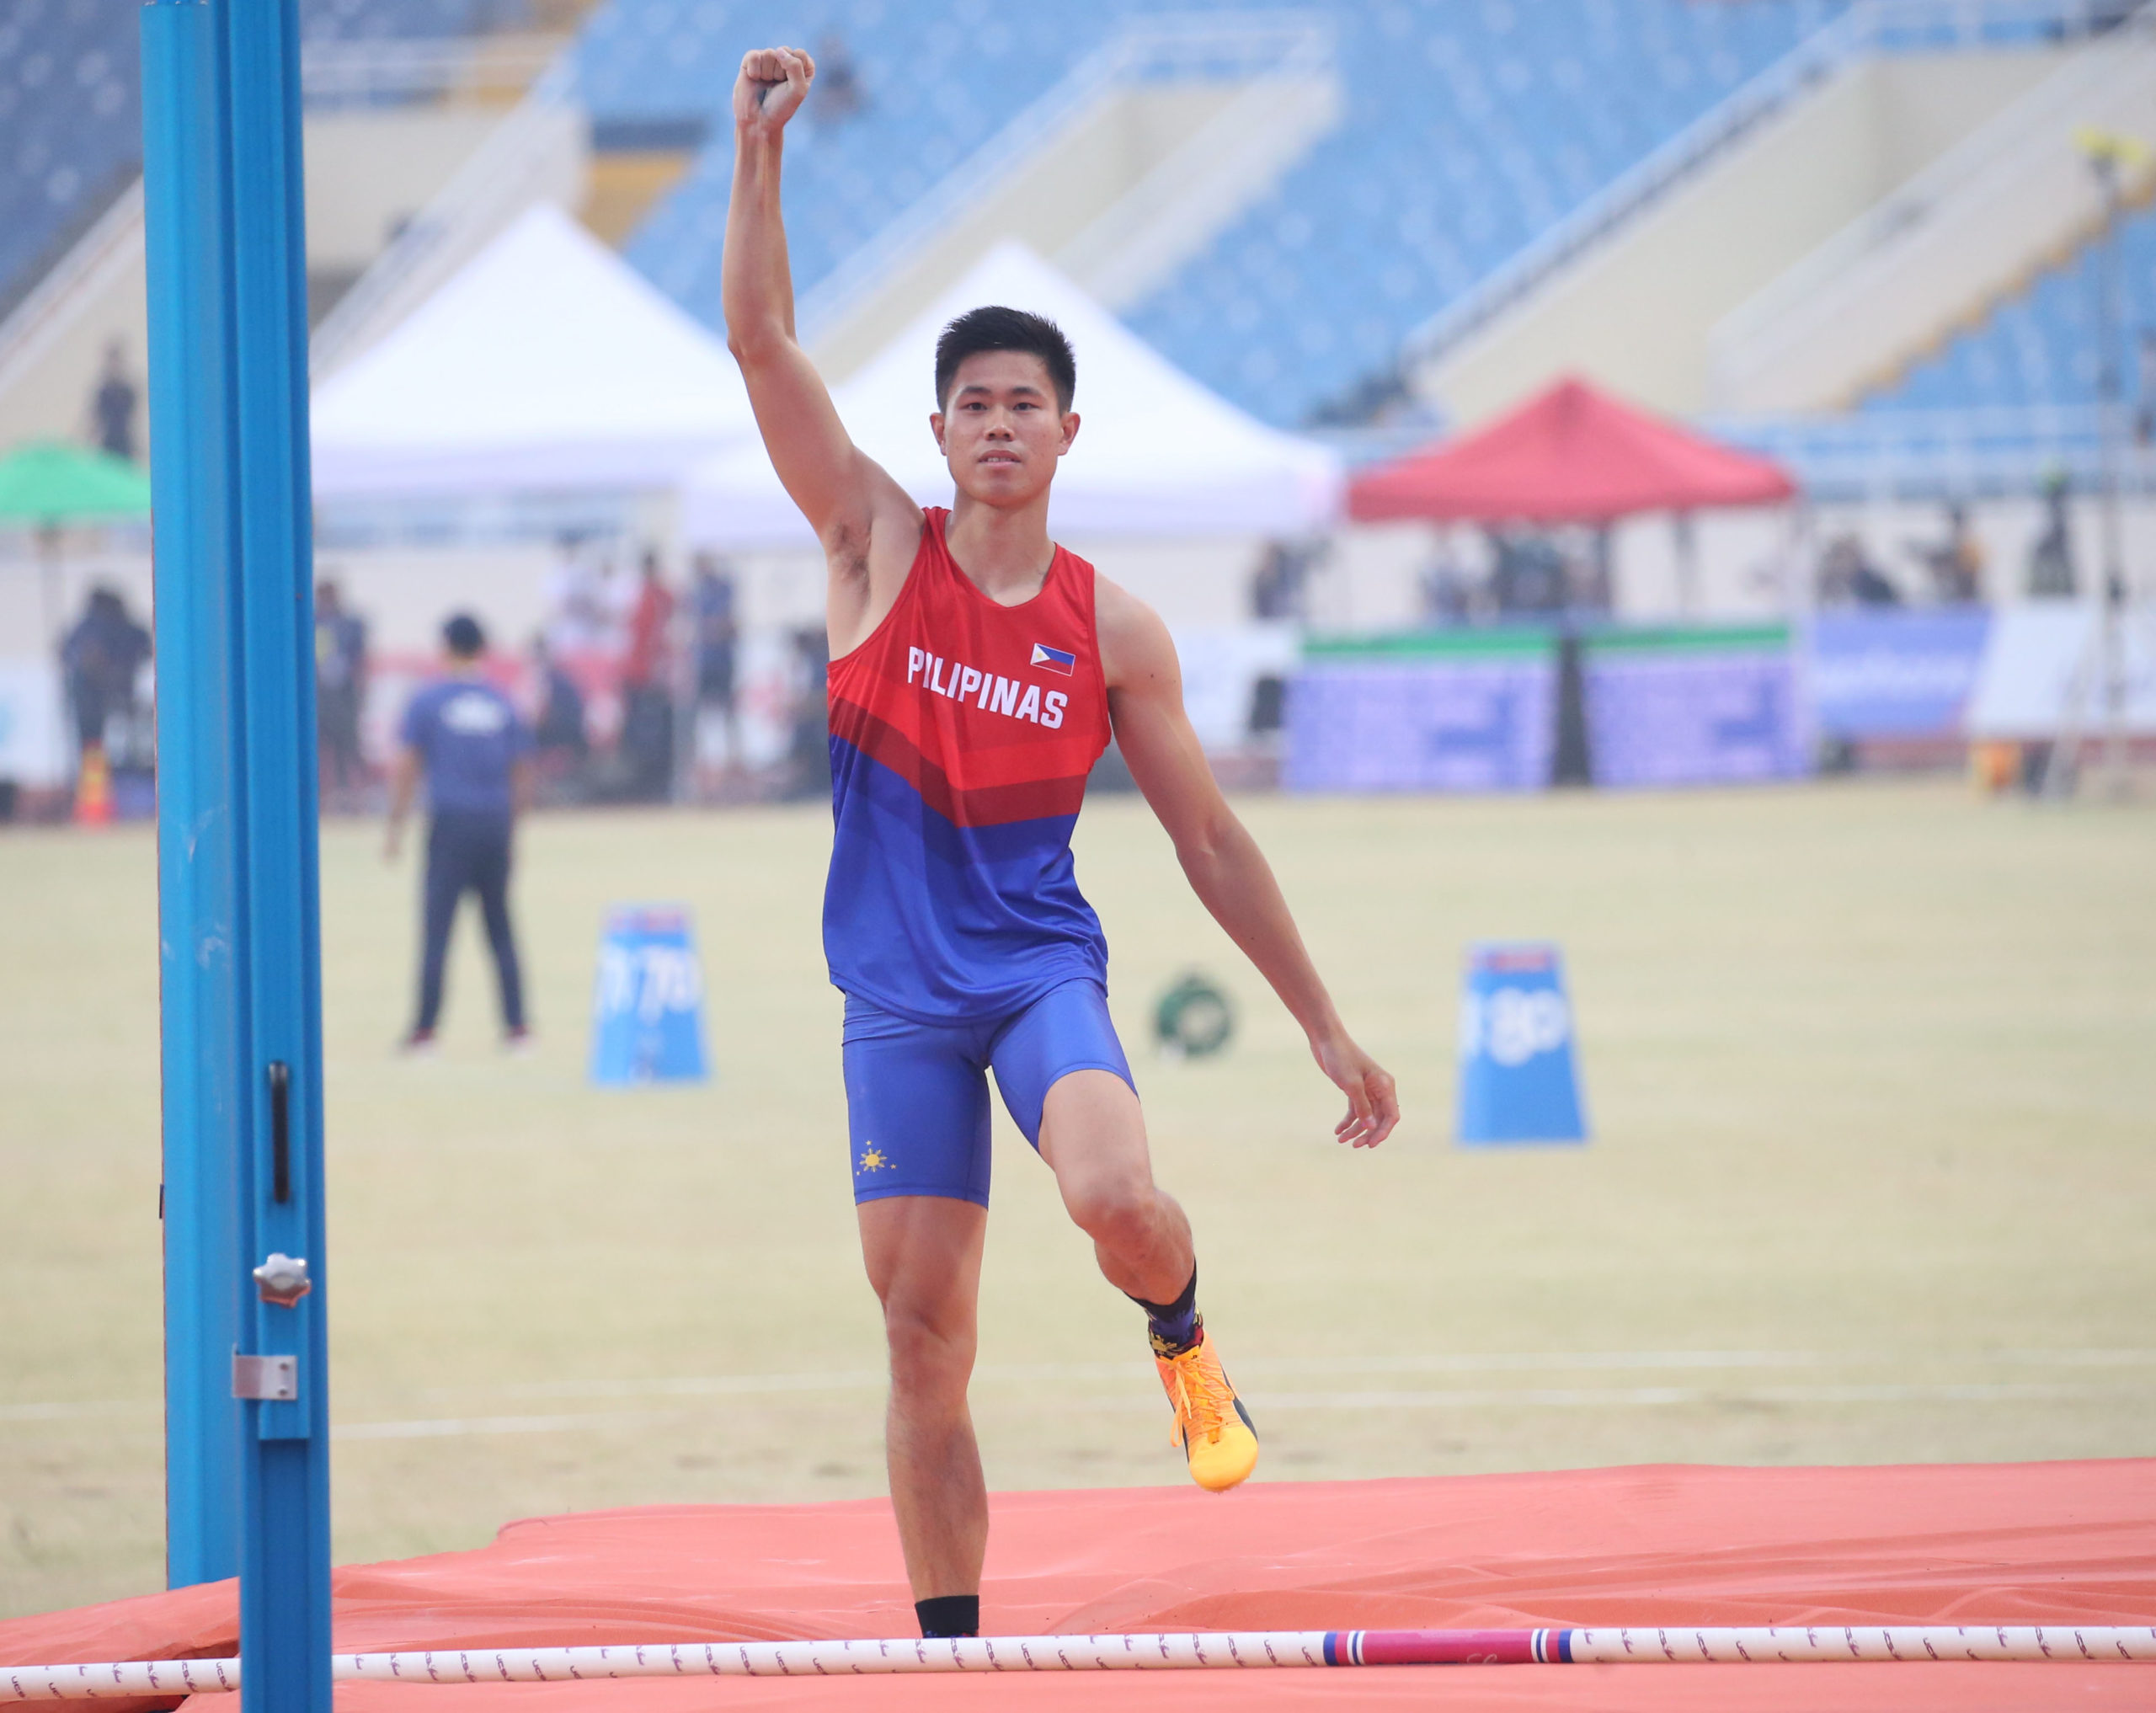 EJ Obiena wins another pole vault gold in the SEA Games. 